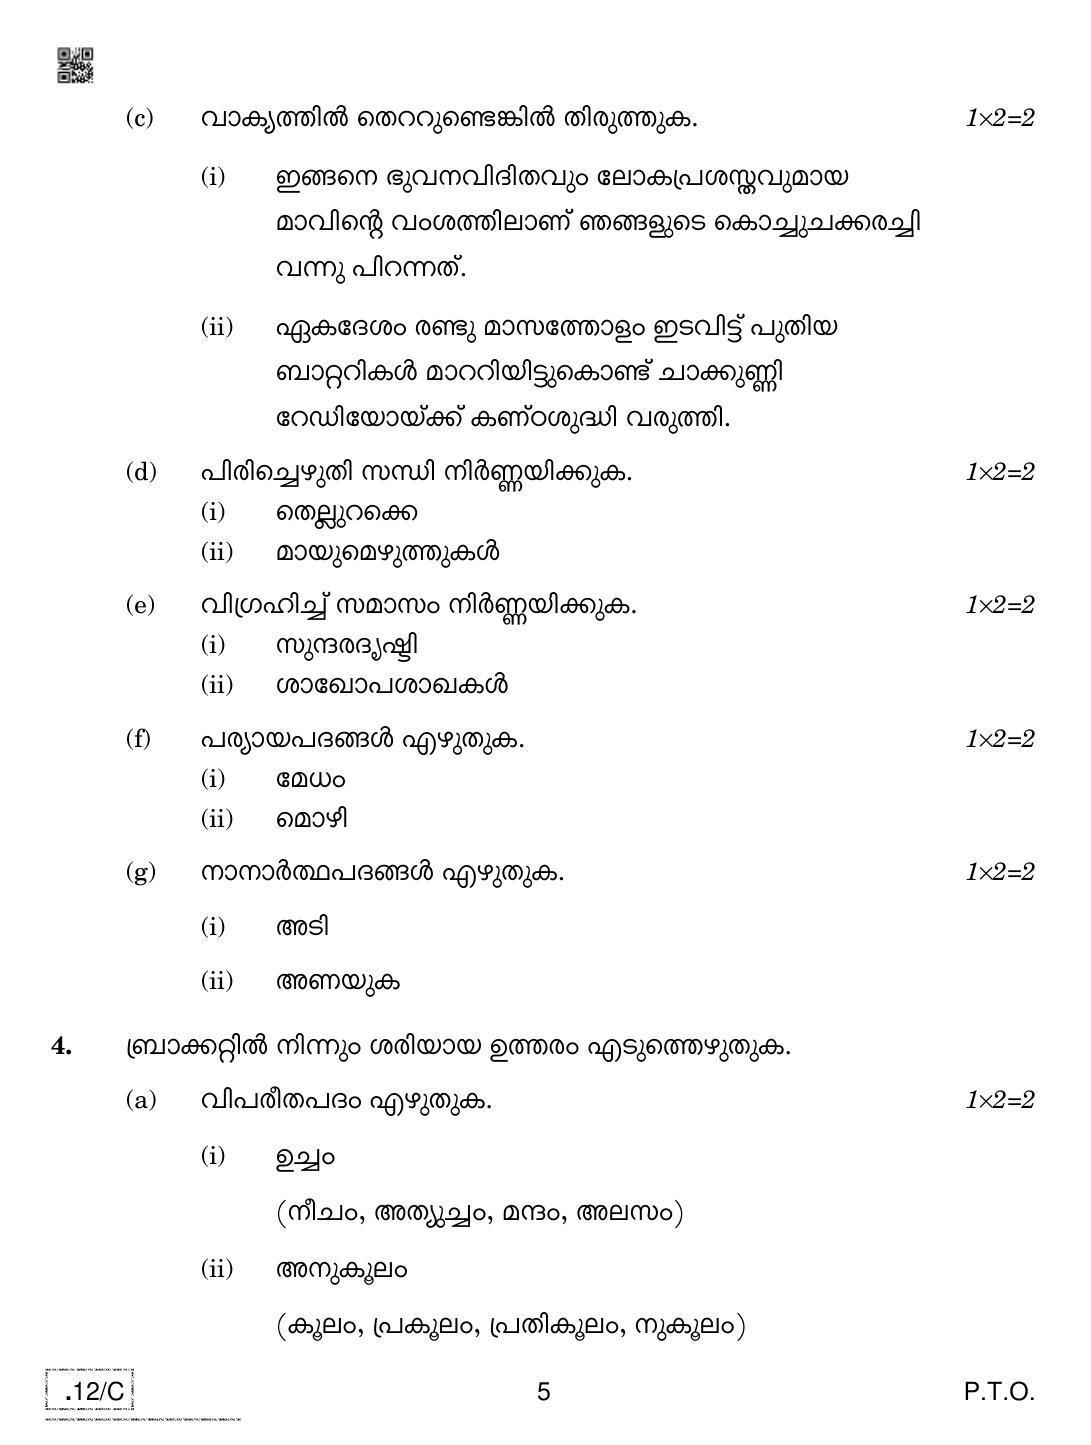 CBSE Class 10 Malayalam 2020 Compartment Question Paper - Page 5